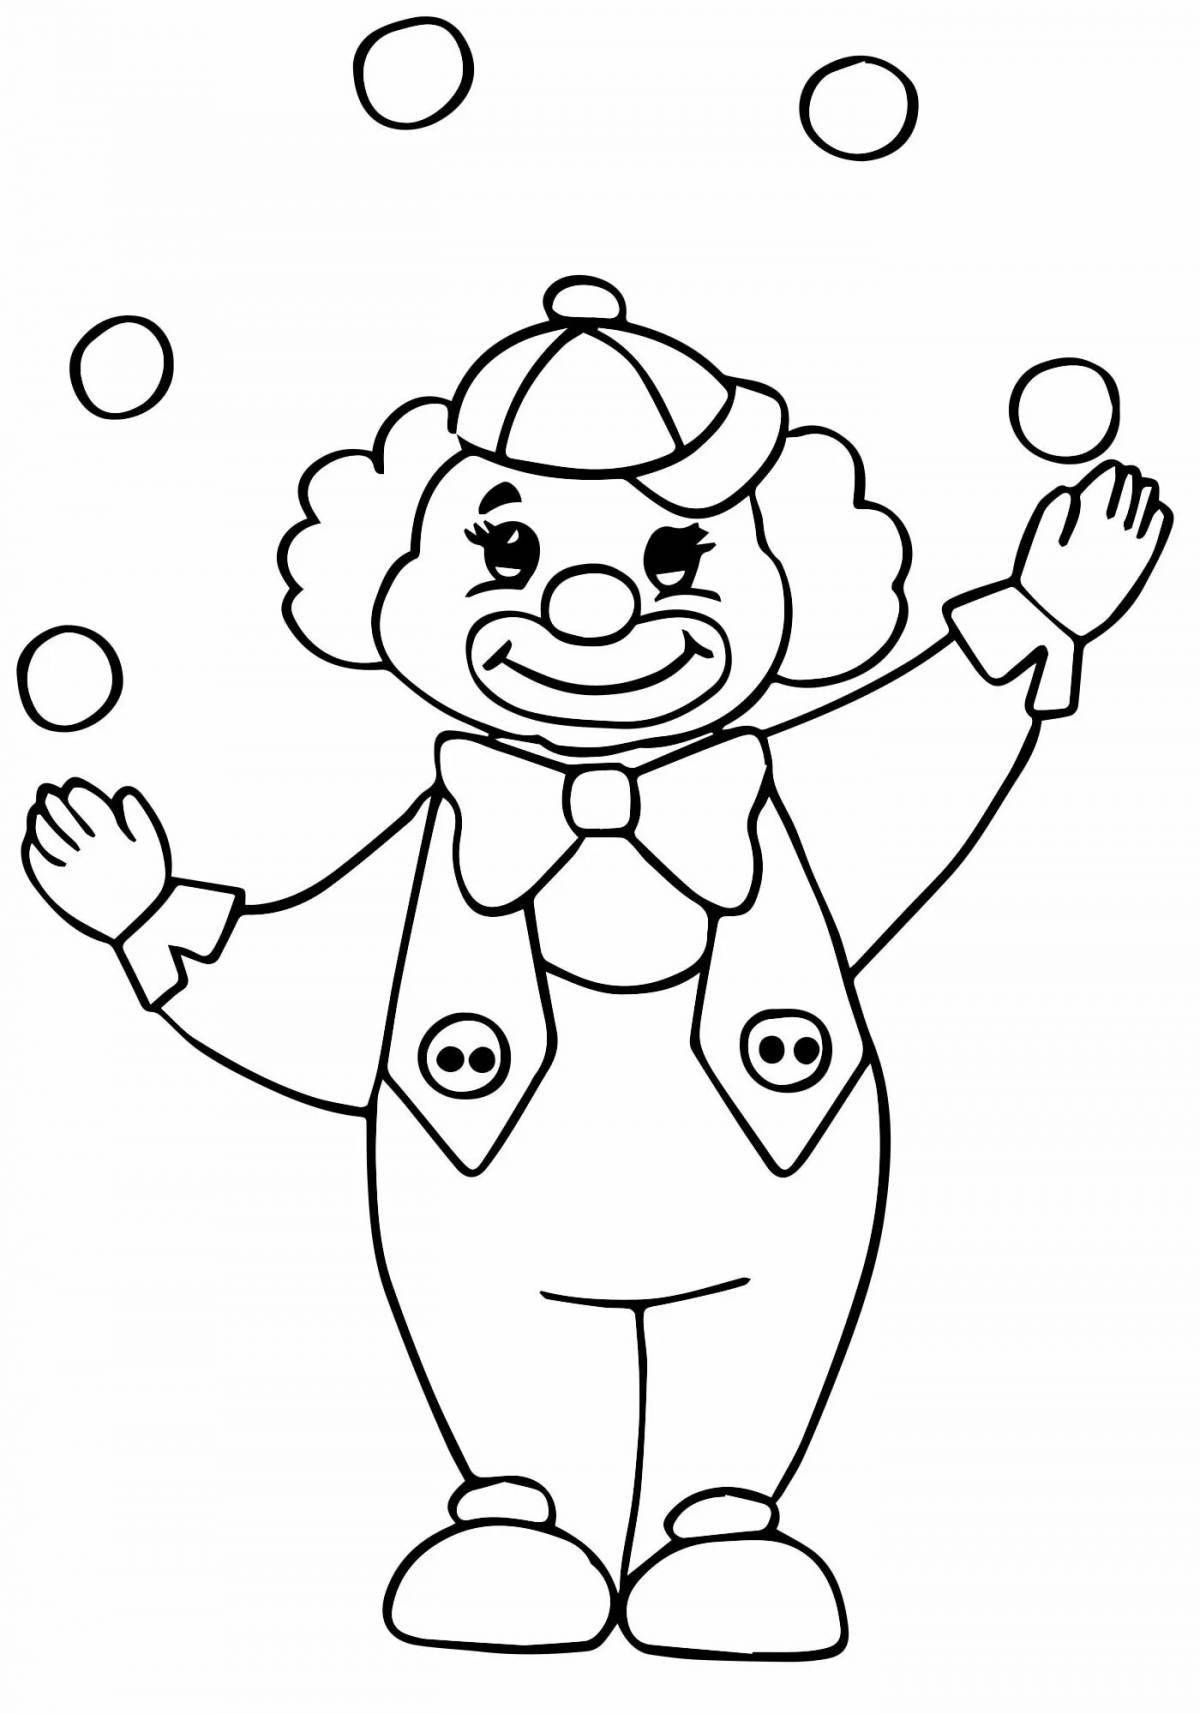 Live clown coloring book for 6-7 year olds